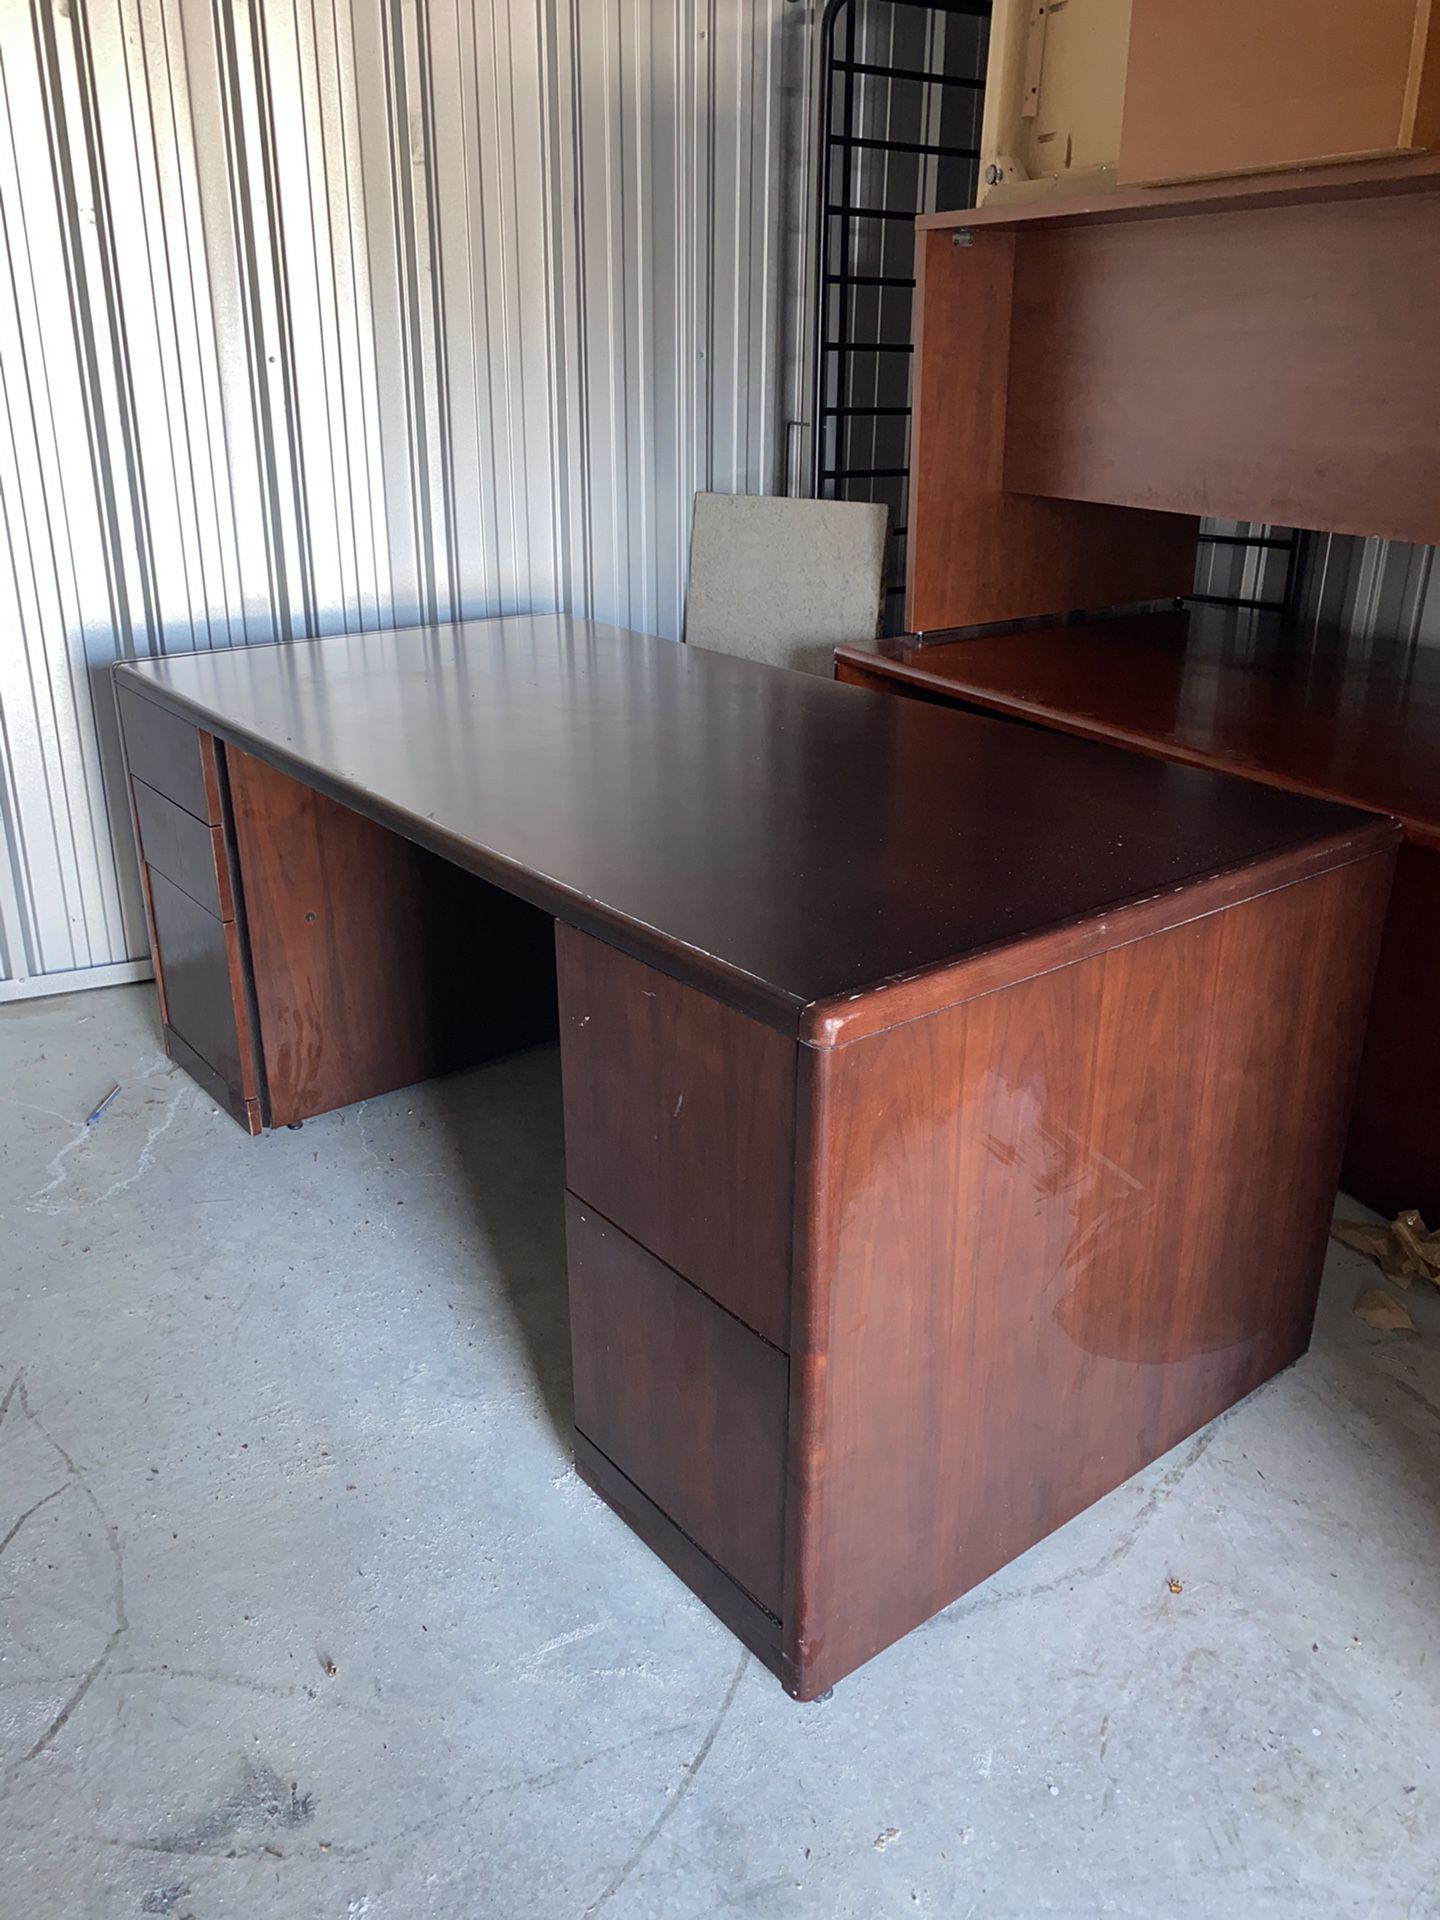 New Desk And File Cabinets